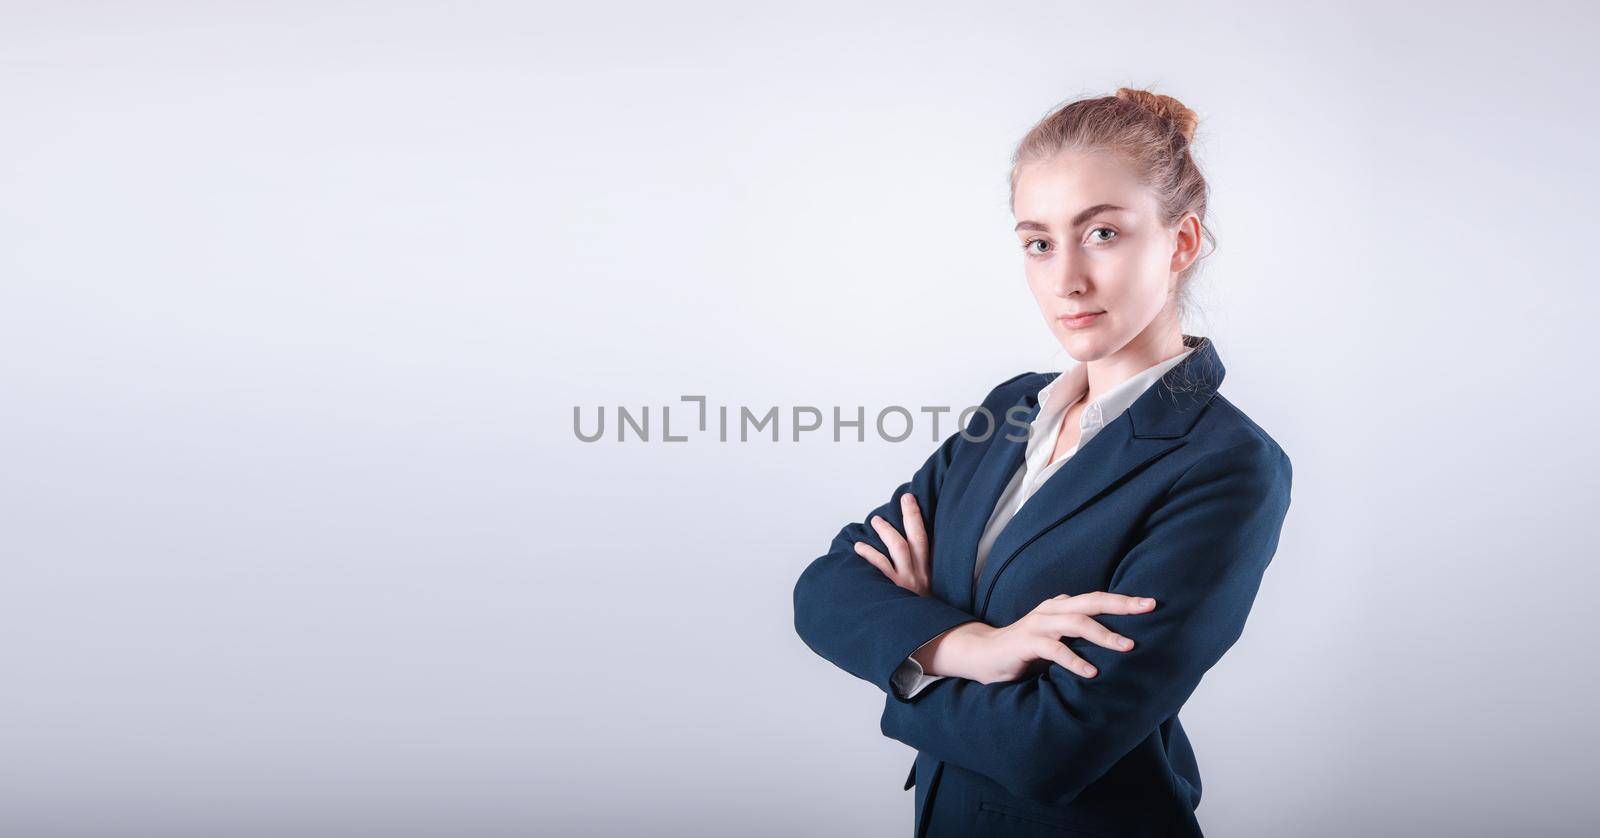 Portrait Attractive of Business Woman Executive Standing Against Isolated Background, Close-Up of Businesswoman in Formal Suit With Arms Crossed on Gray Backgrounds. Finance Employee Occupation by MahaHeang245789